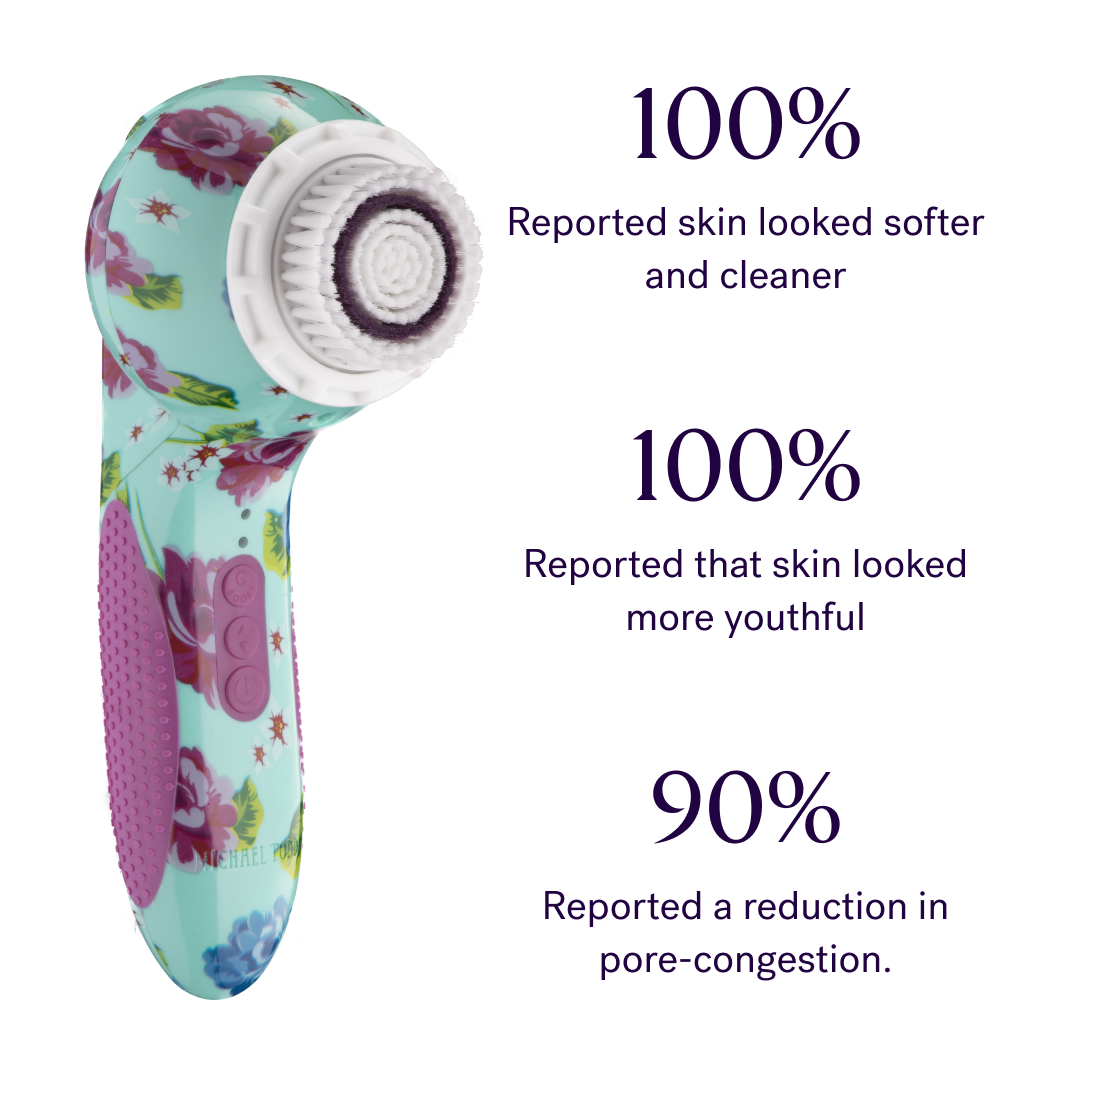 Upgrade your skincare routine with the Glow All Day facial cleanser from Michael Todd Beauty featuring a beautiful floral design. This device will help you achieve a radiant glow effortlessly.